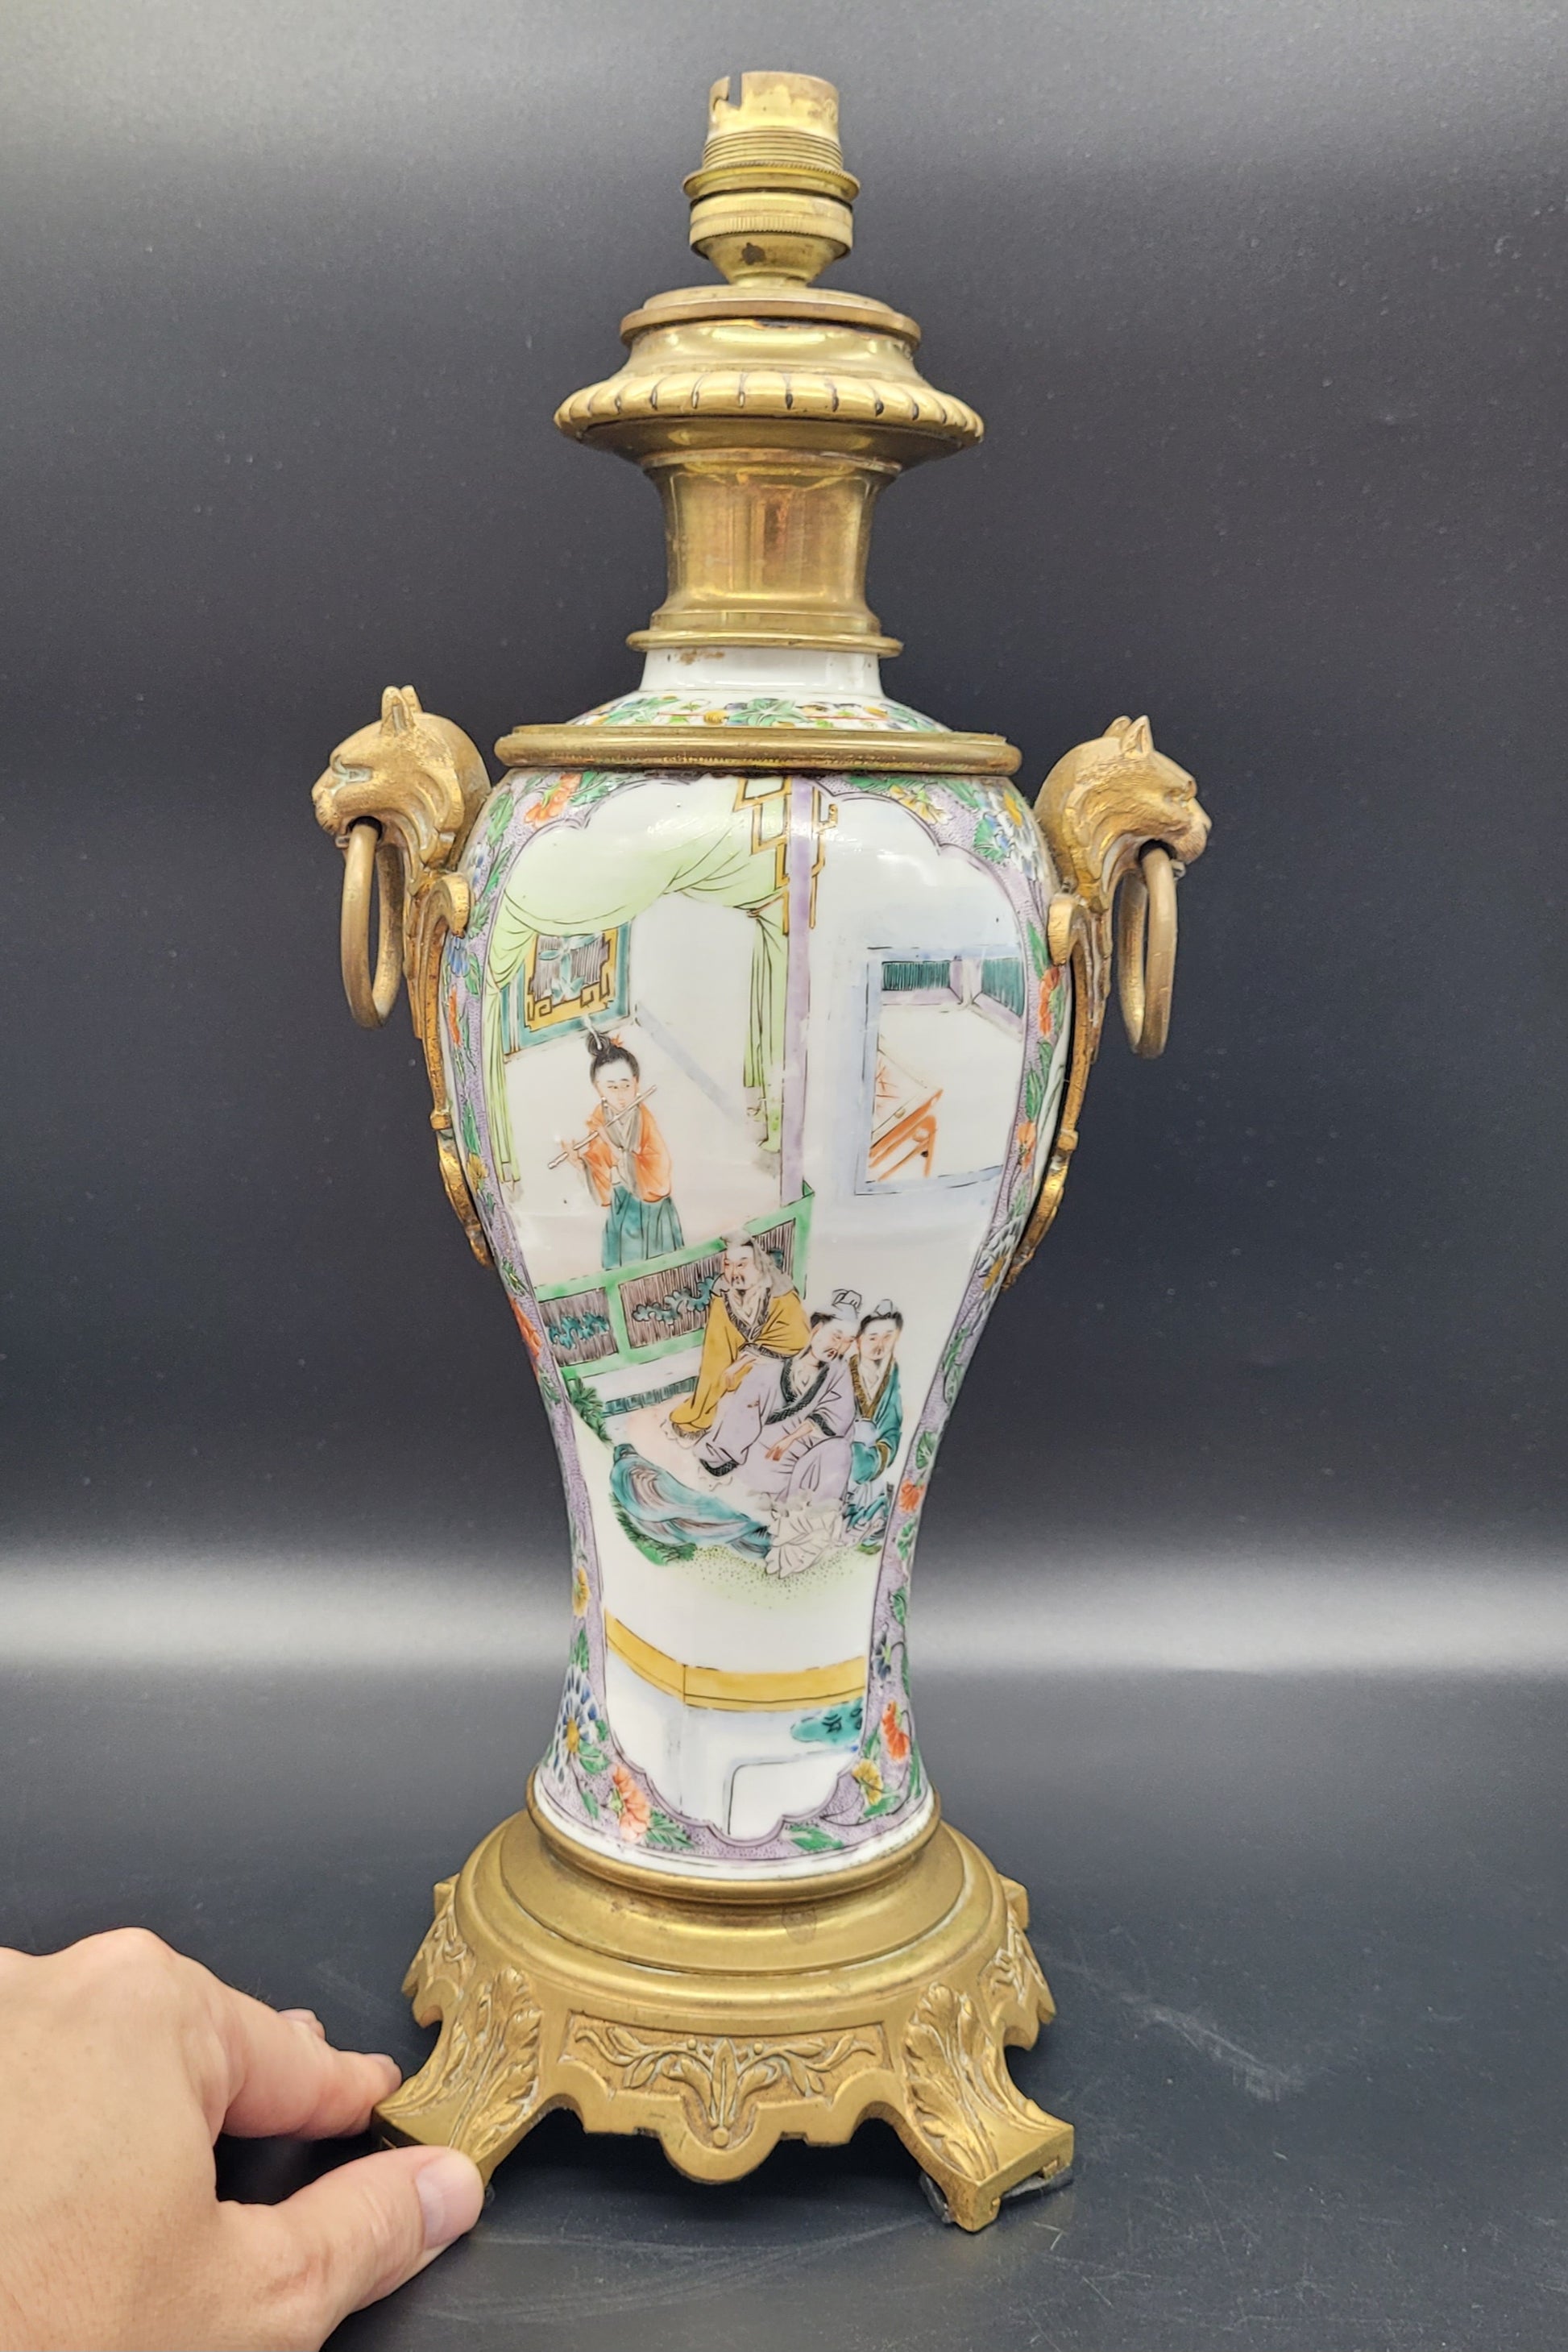 Beautiful Antique Chinese 18th /19th Century Famille Vert Vase With High Quality Ormolu Mounts.